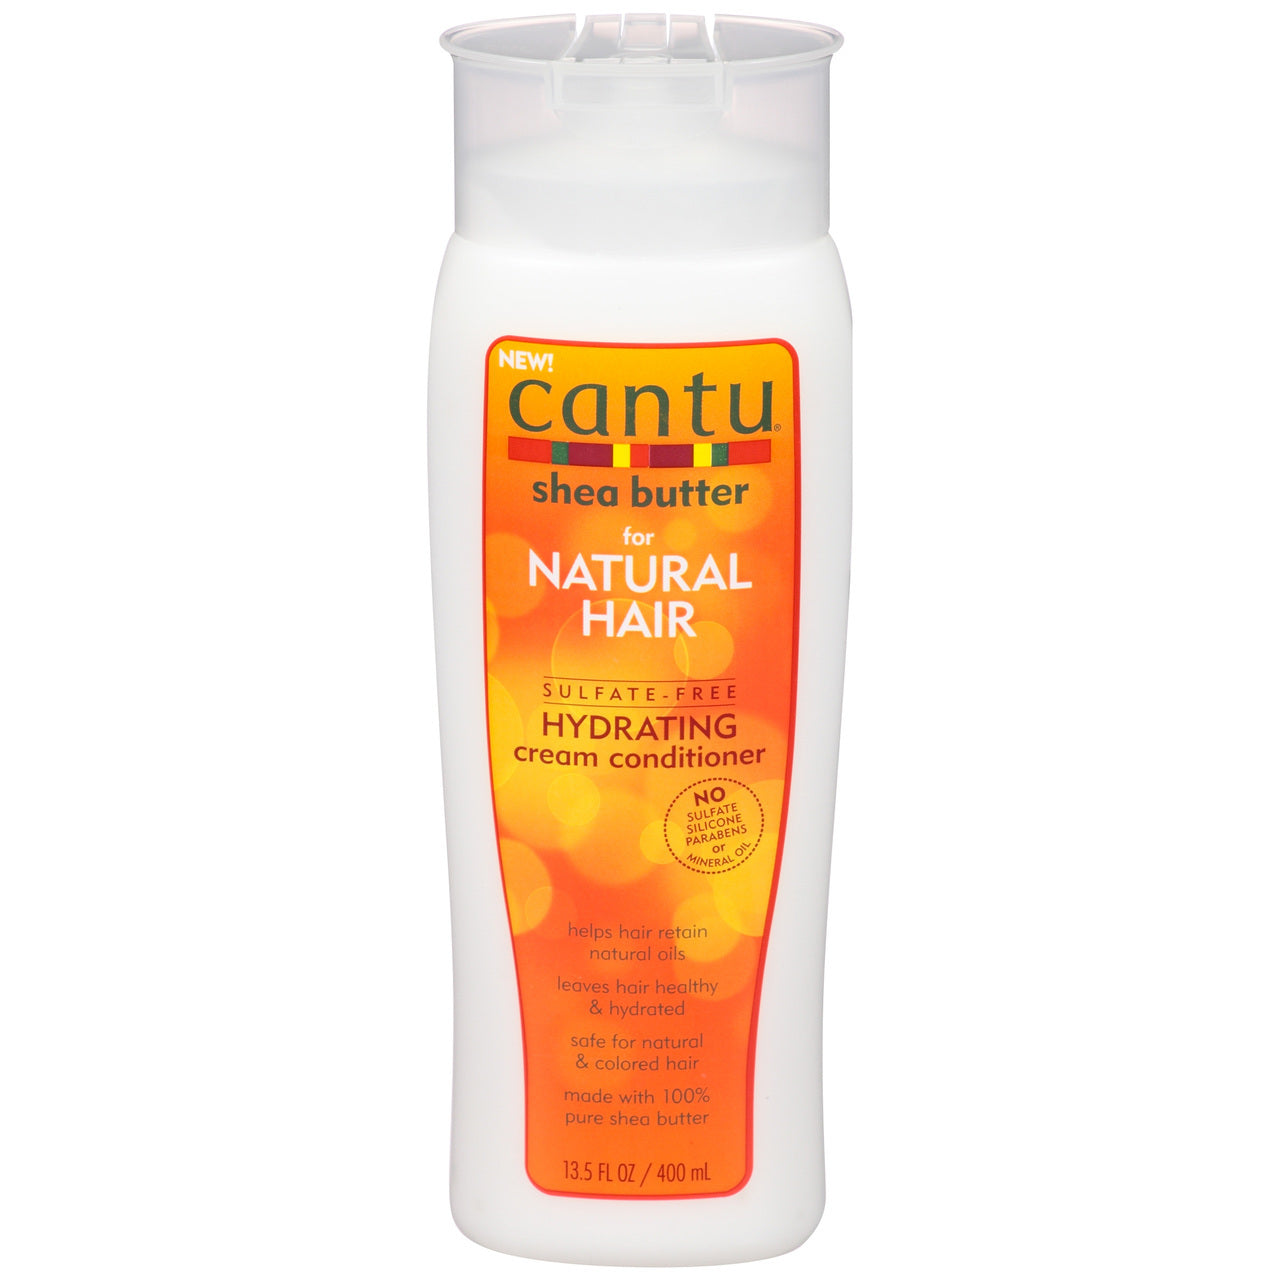 Cantu Shea Butter for Natural Hair Hydrating Cream Conditioner 13.5 Ounce - Dolly Beauty 